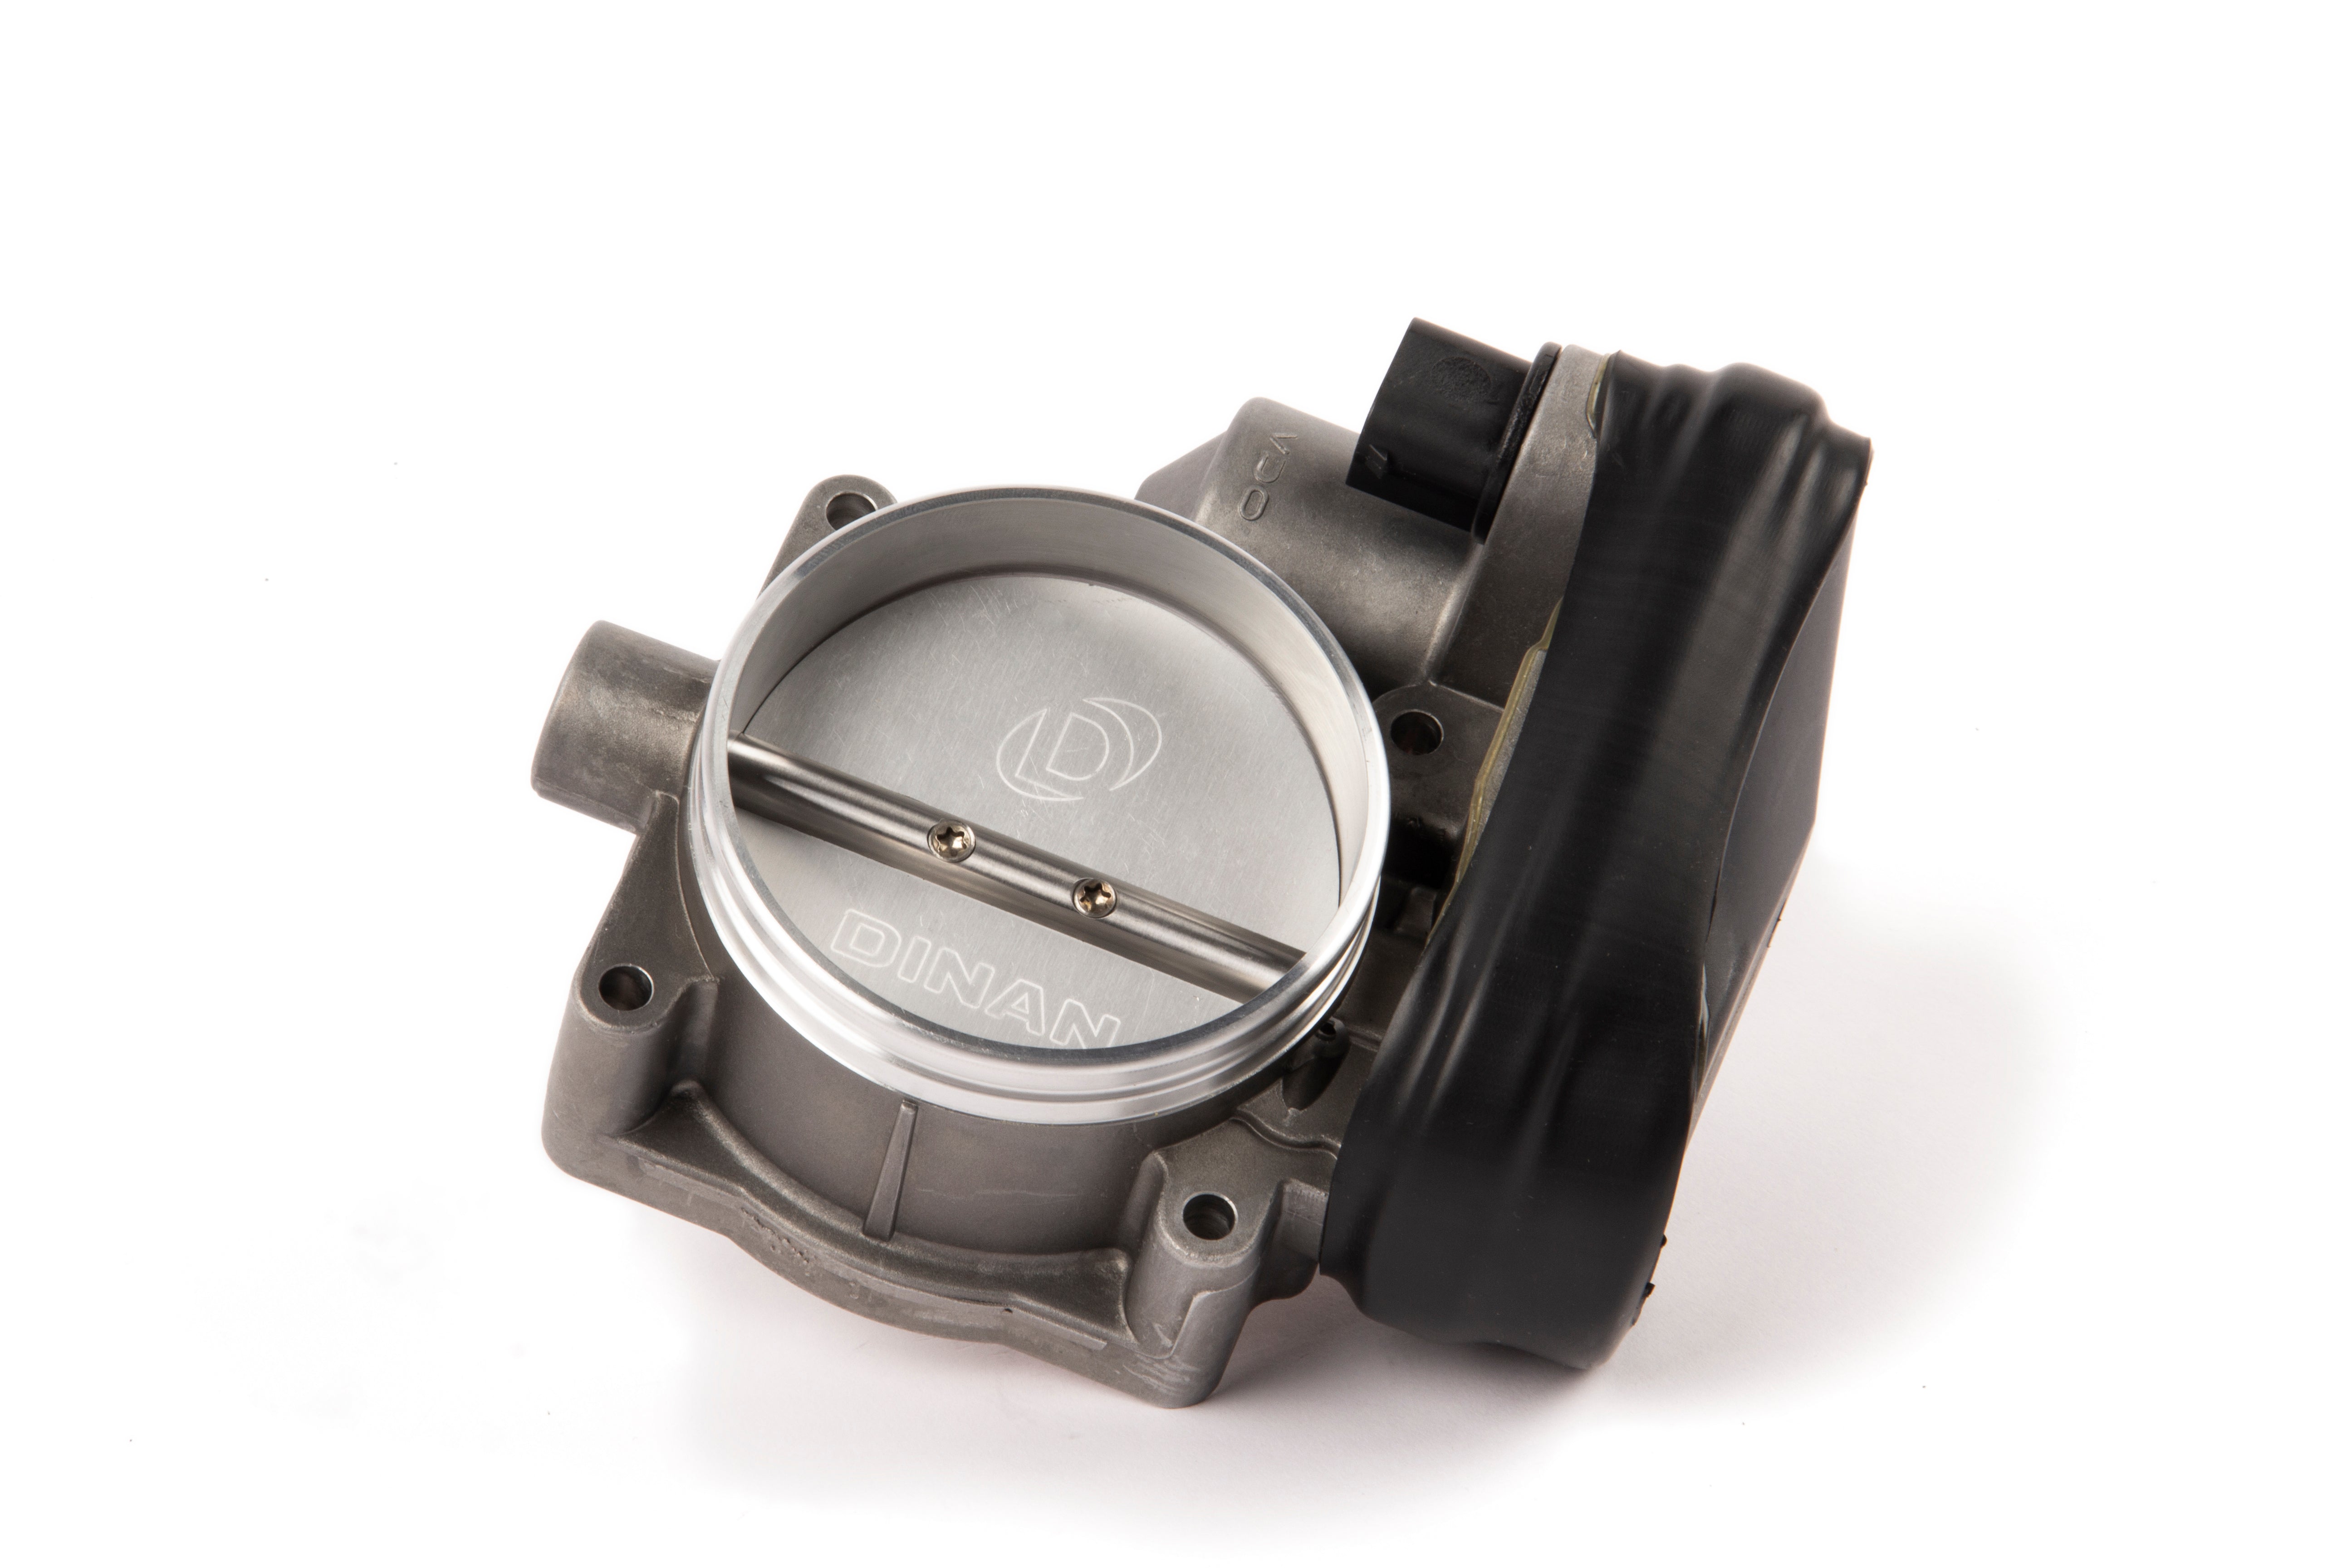 Dinan BMW (Convertible/Coupe/Sedan/Sport Utility - 3.0) Fuel Injection Throttle Body D760-3300A